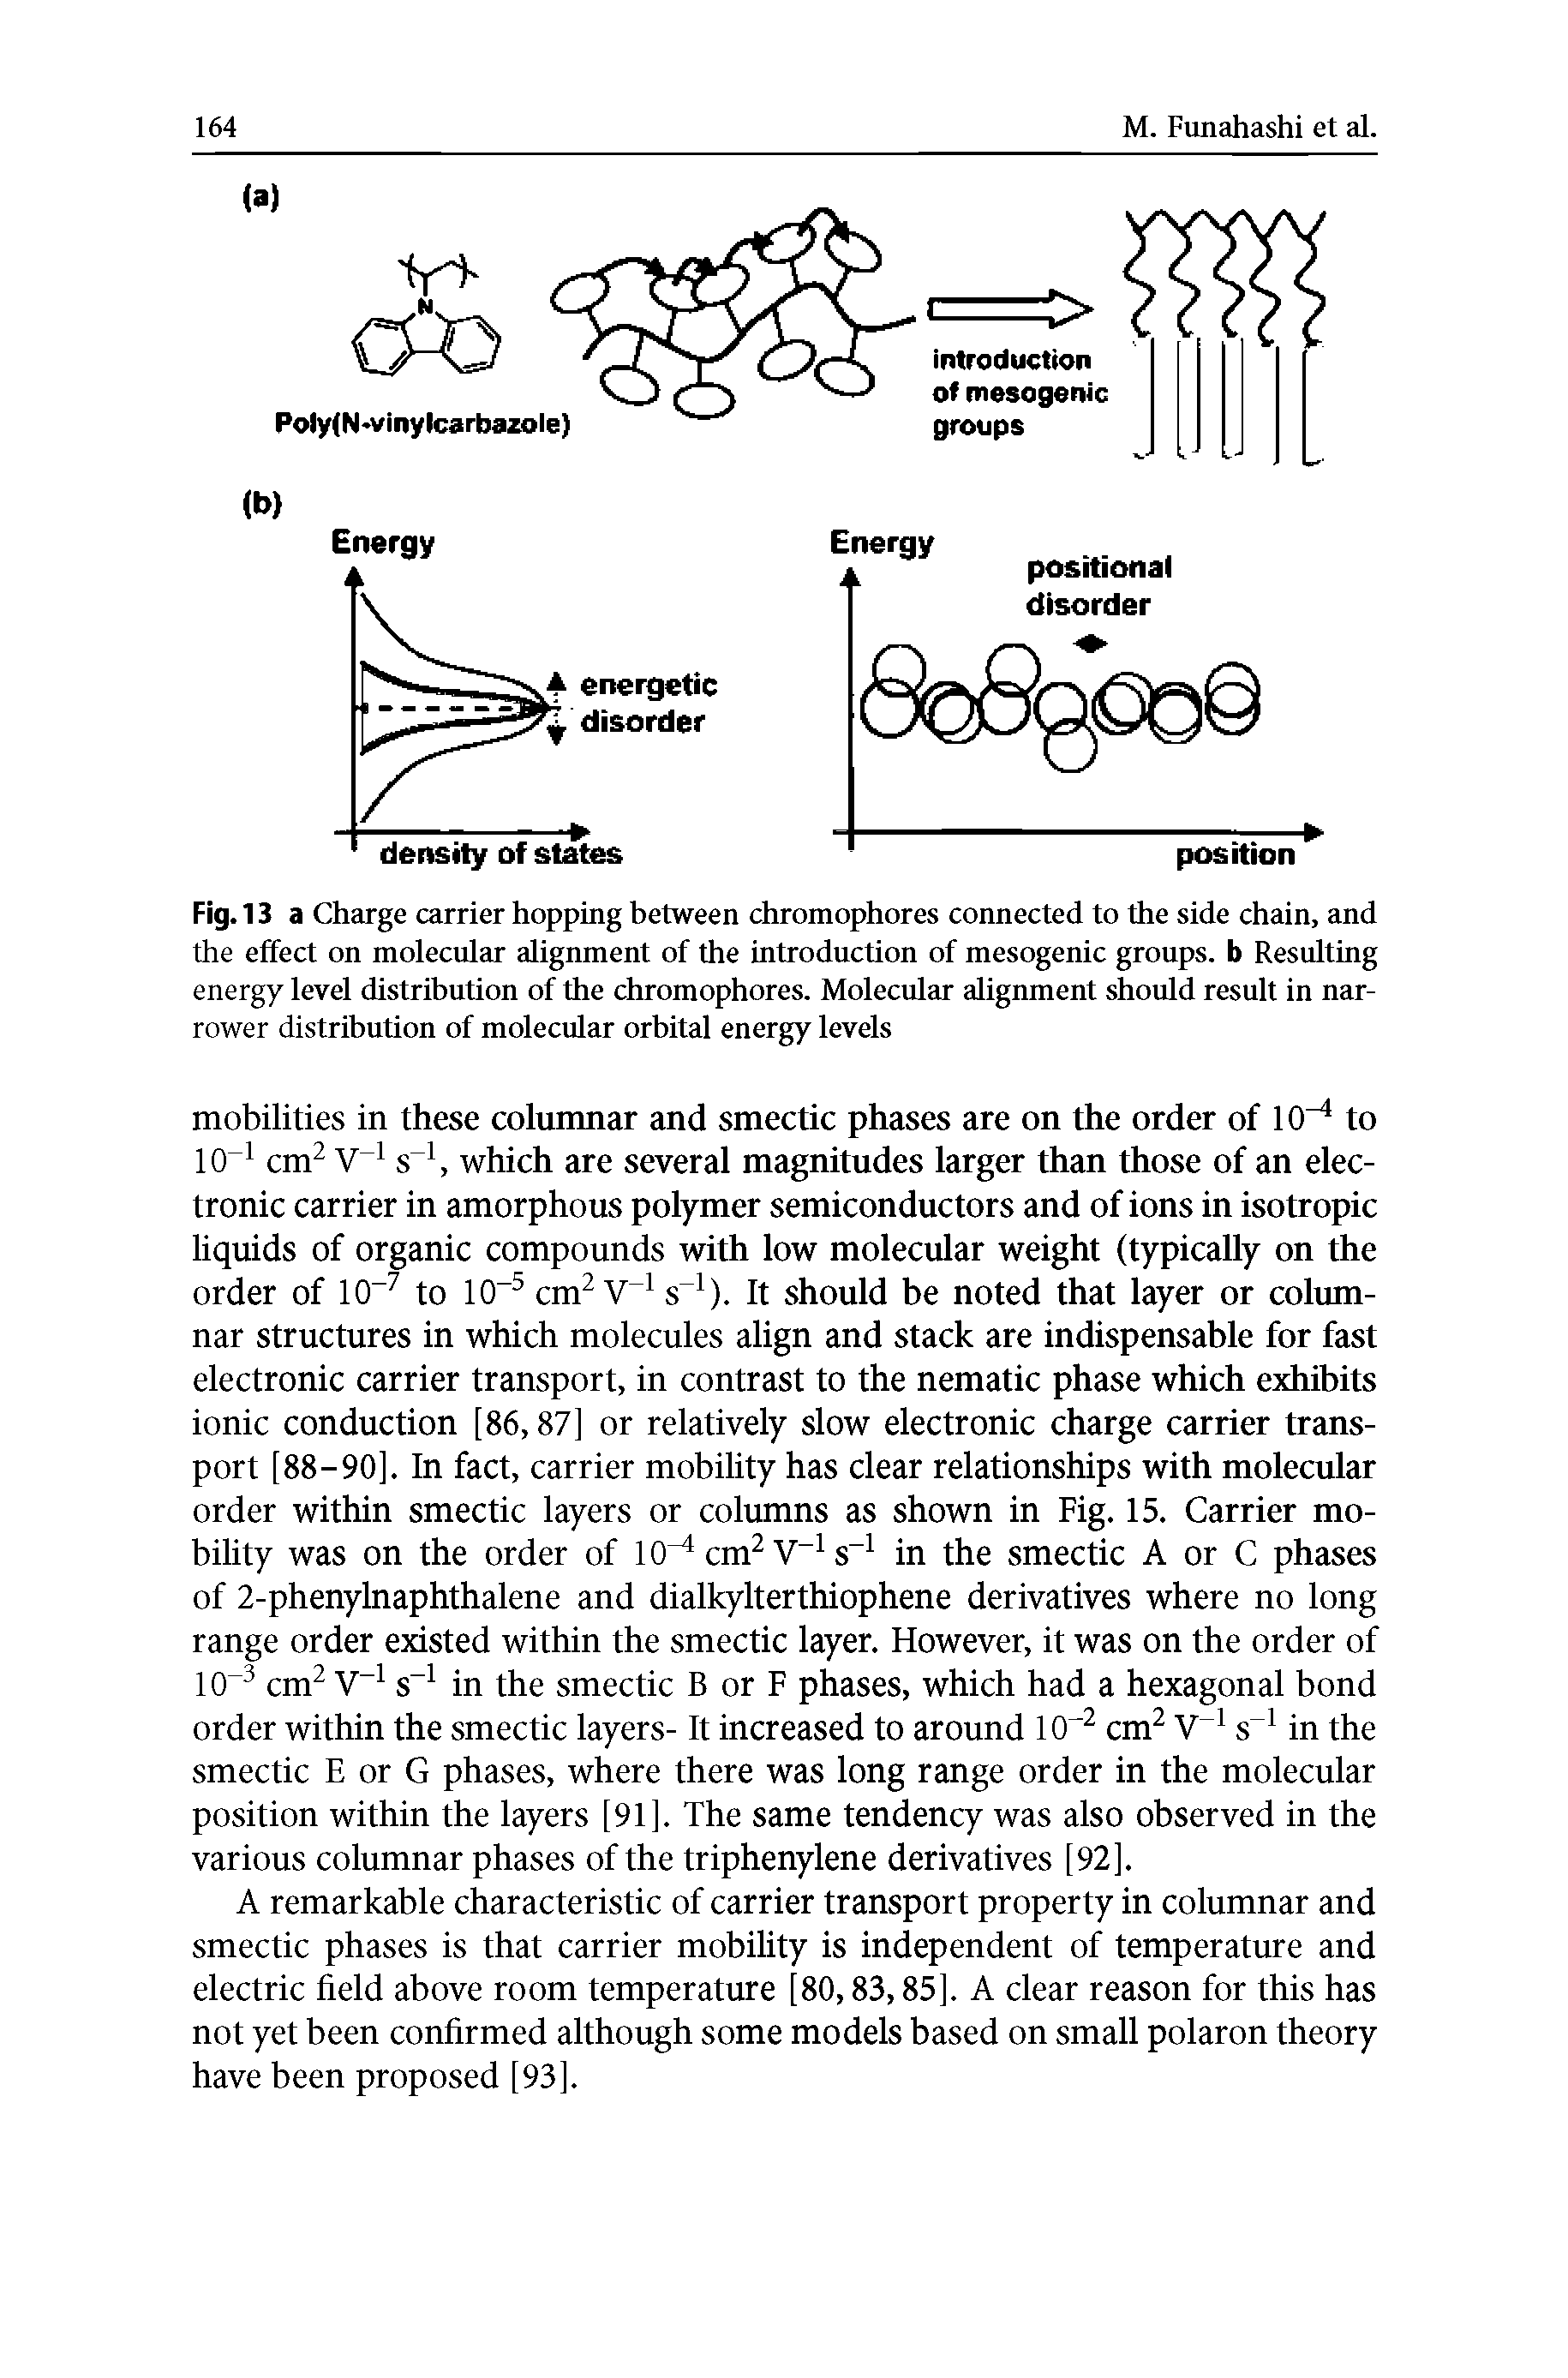 Fig. 13a Charge carrier hopping between chromophores connected to the side chain, and the effect on molecular alignment of the introduction of mesogenic groups, b Resulting energy level distribution of the chromophores. Molecular alignment should result in narrower distribution of molecular orbital energy levels...